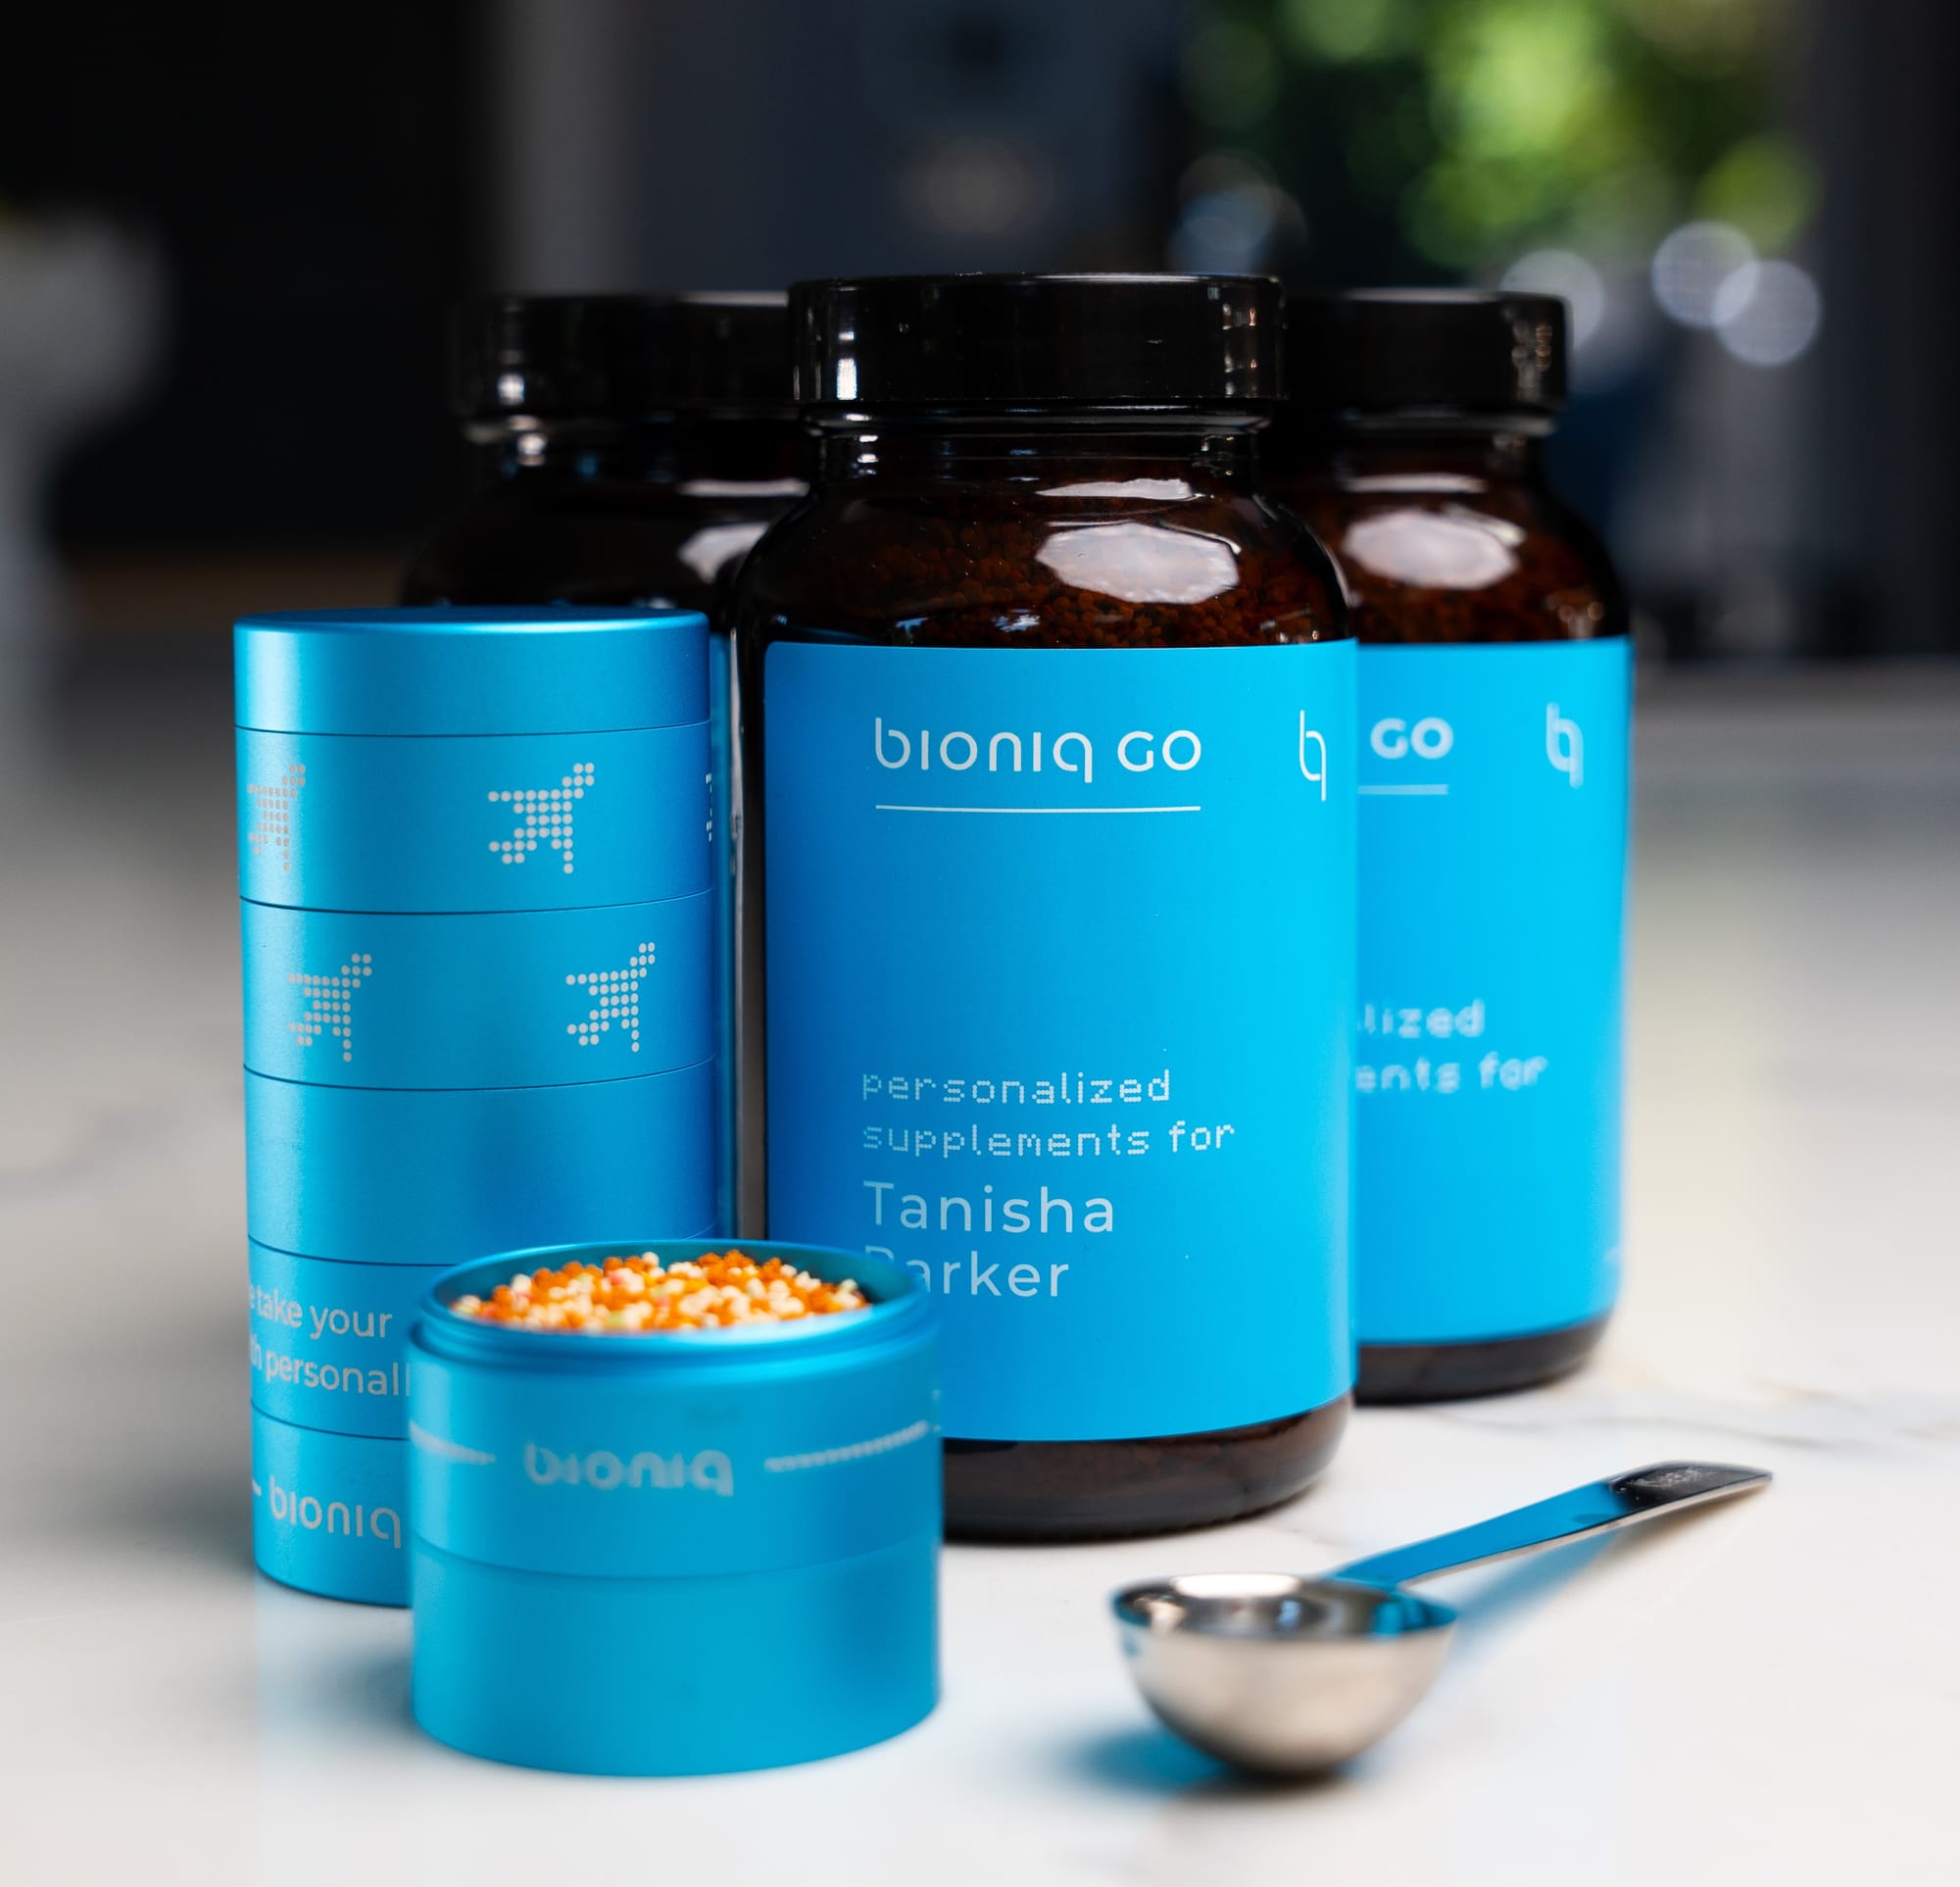 Interview with Vadim Fedotov, Founder & CEO of Bioniq, A Tailor-made Health Supplements Provider